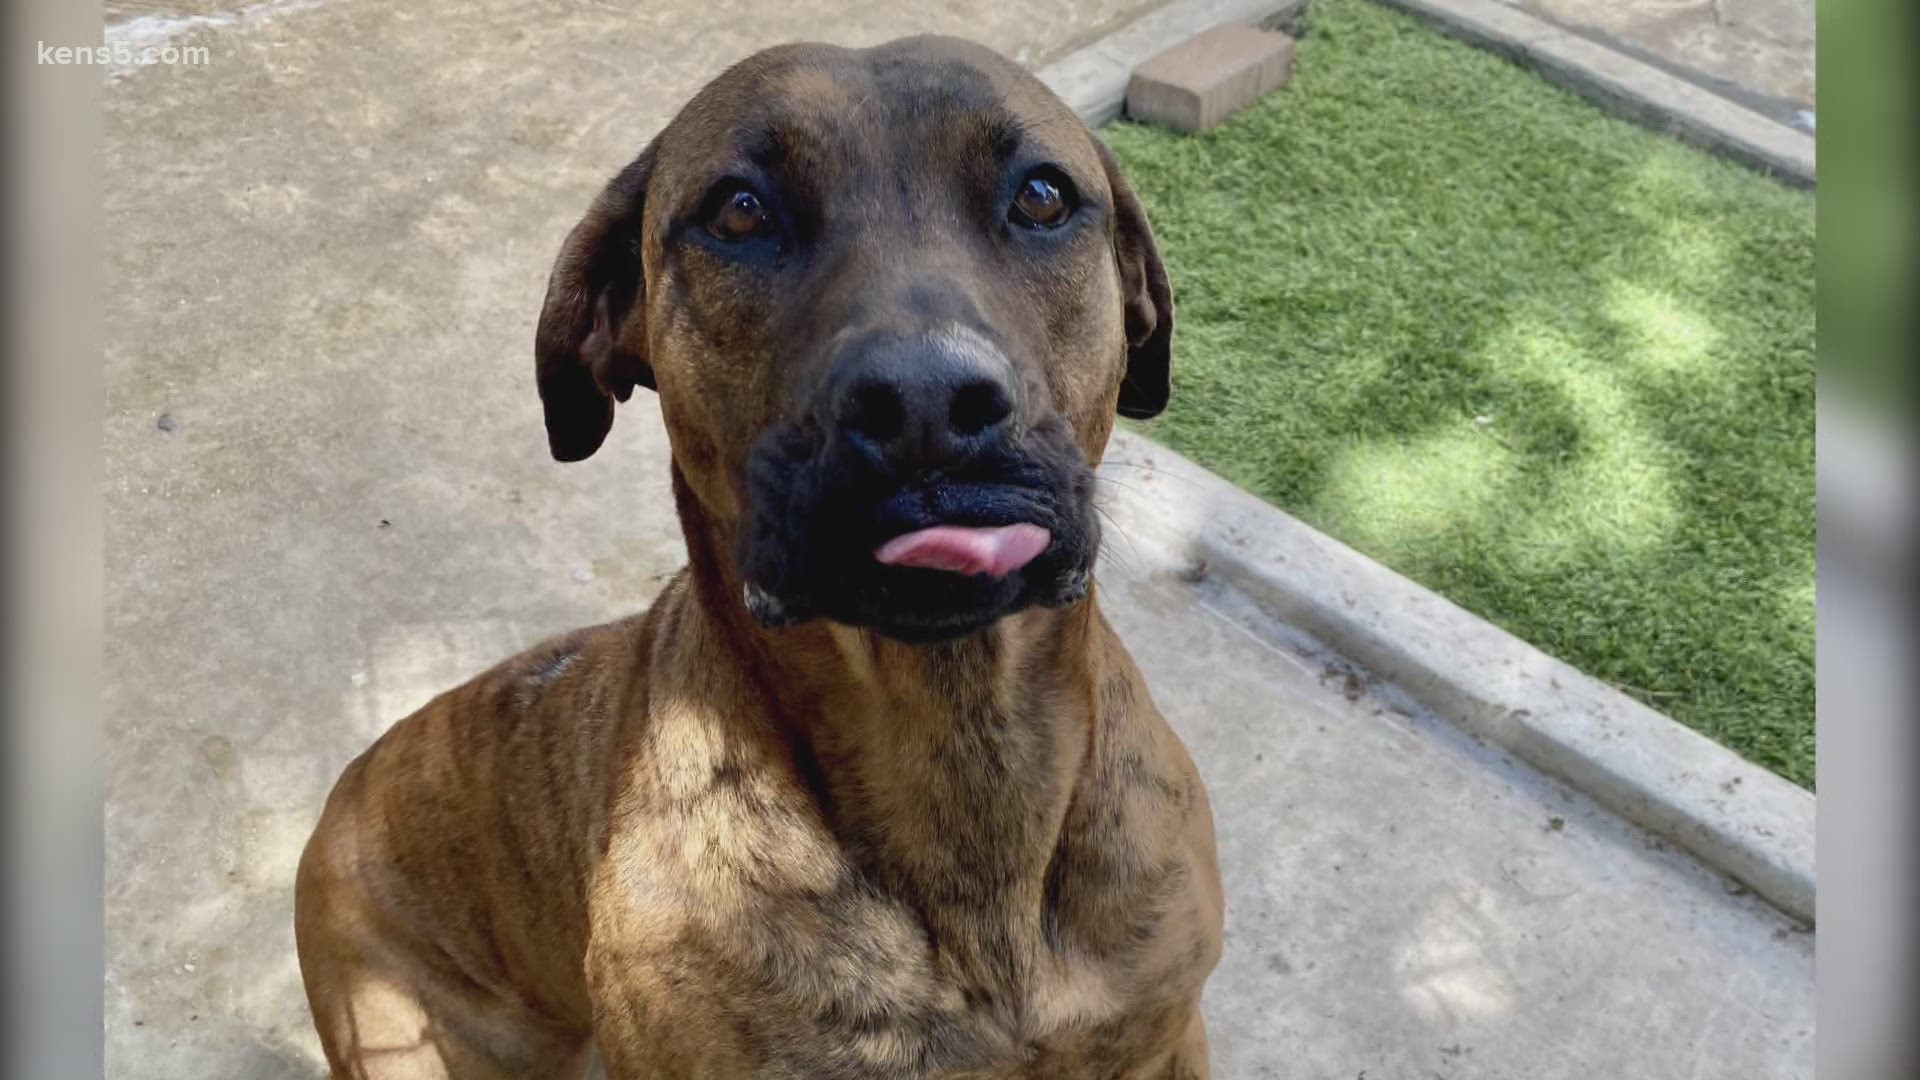 The San Antonio Humane Society says she's a 3-year-old retriever mix, described as a gentle giant. Daryln can sit, follow other commands and is very treat motivated.